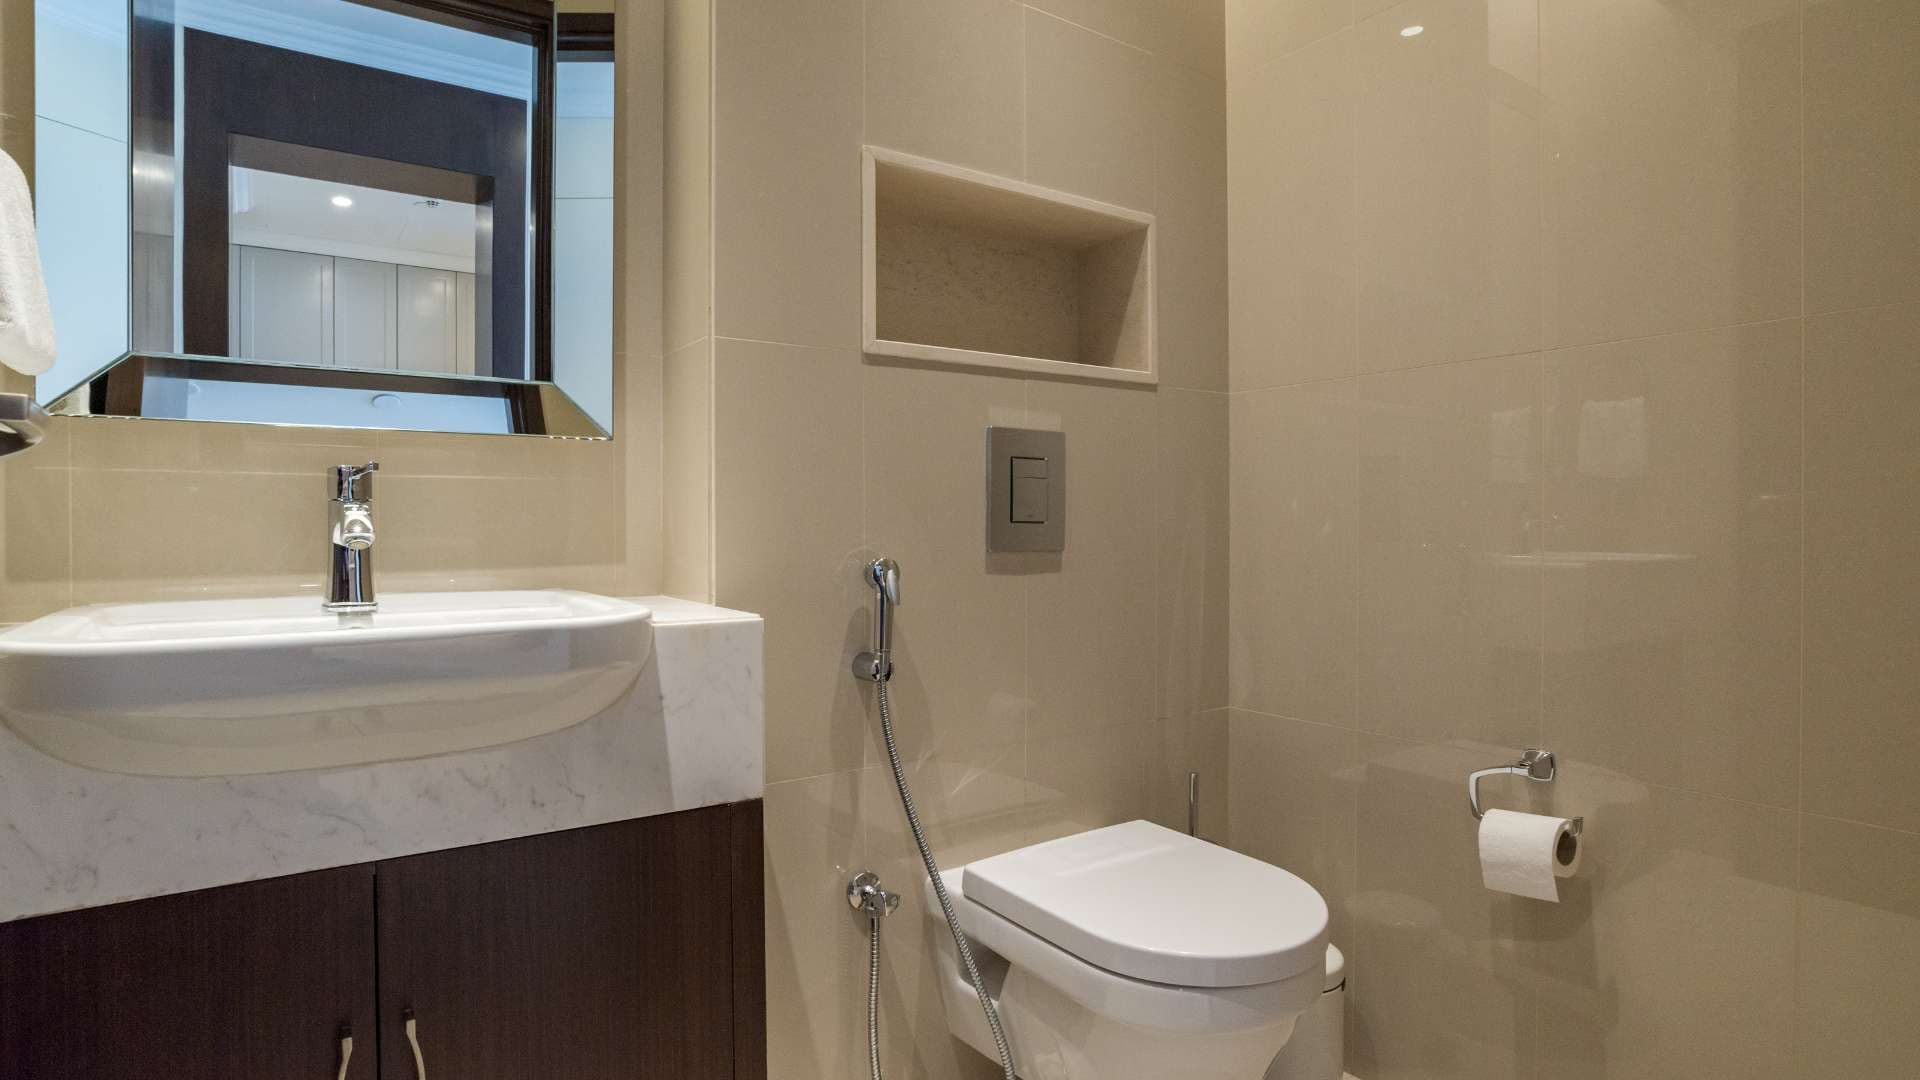 2 Bedroom Apartment For Sale The Address Residence Fountain Views Lp09123 7cc58a527df2400.jpg